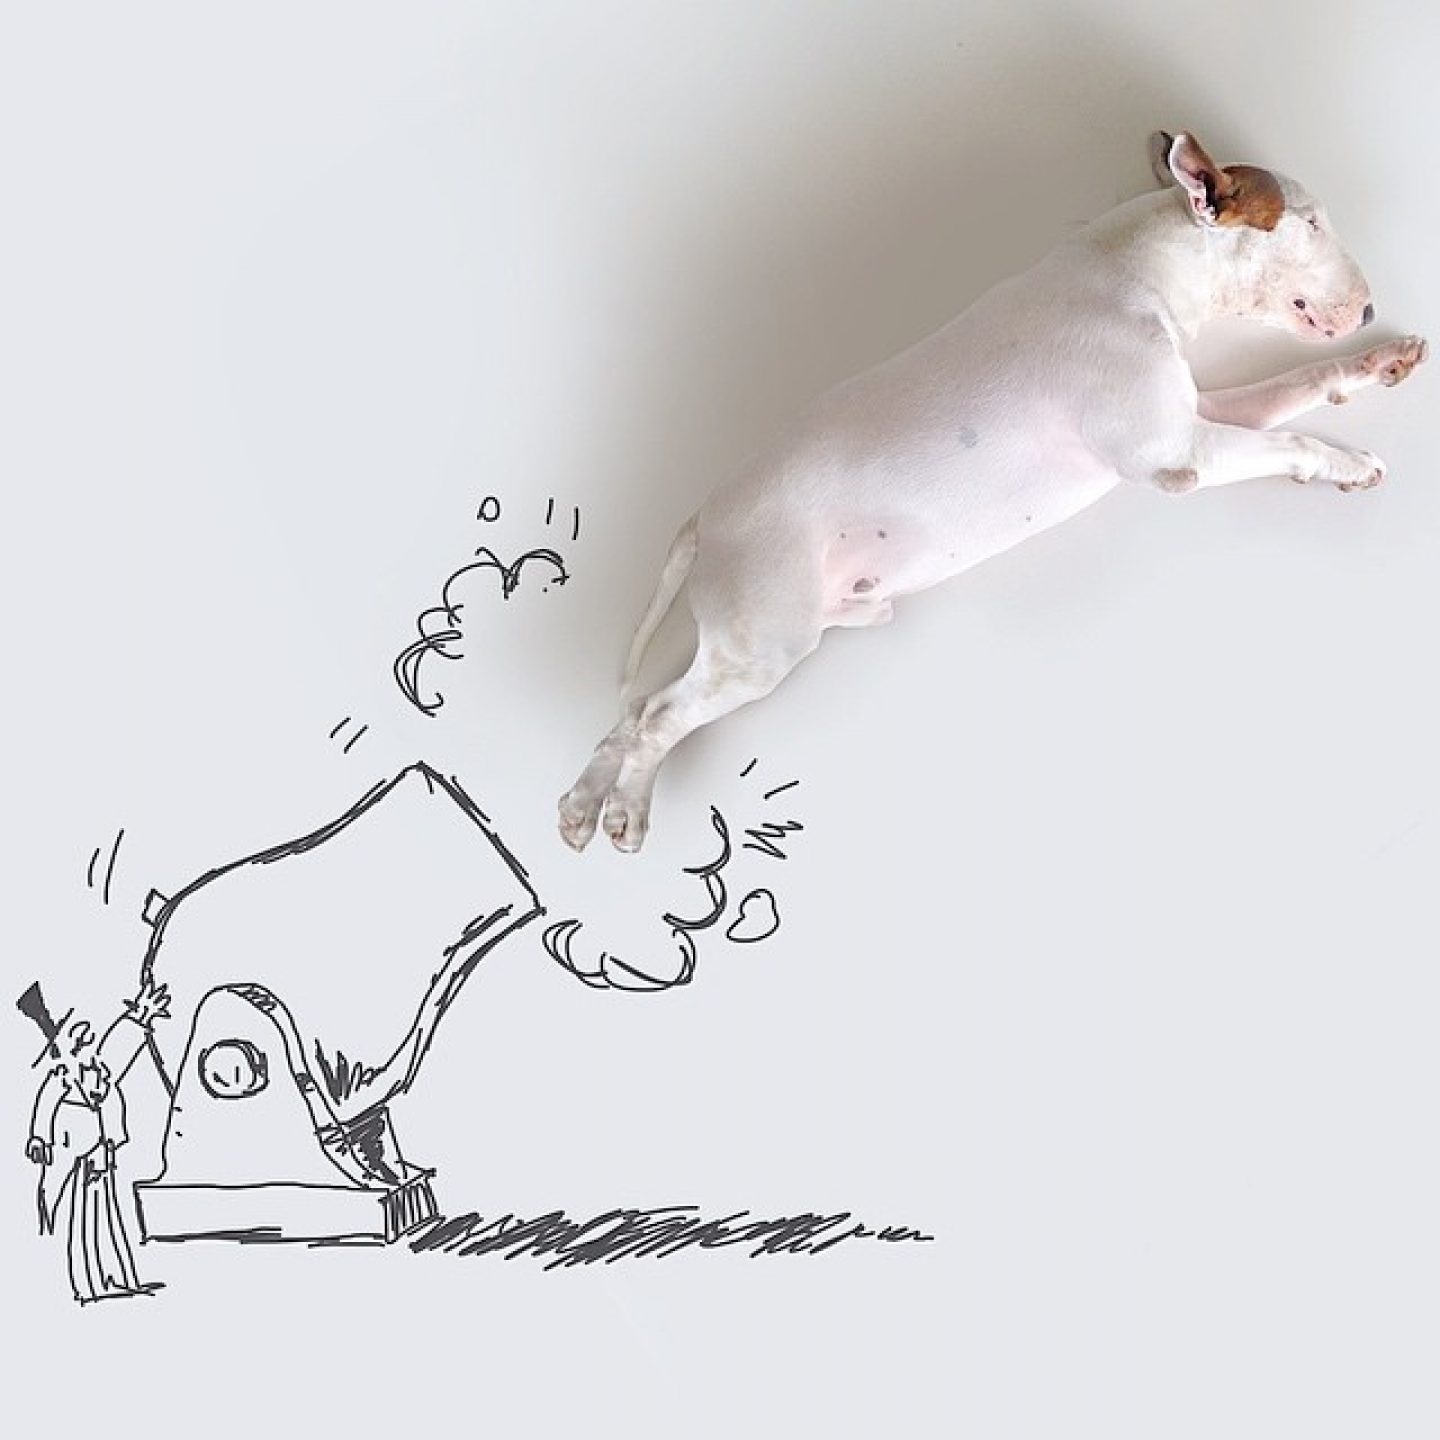 Creative Dog Owner Puts His Pet In Funny, Hand-Drawn Scenes - IGNANT